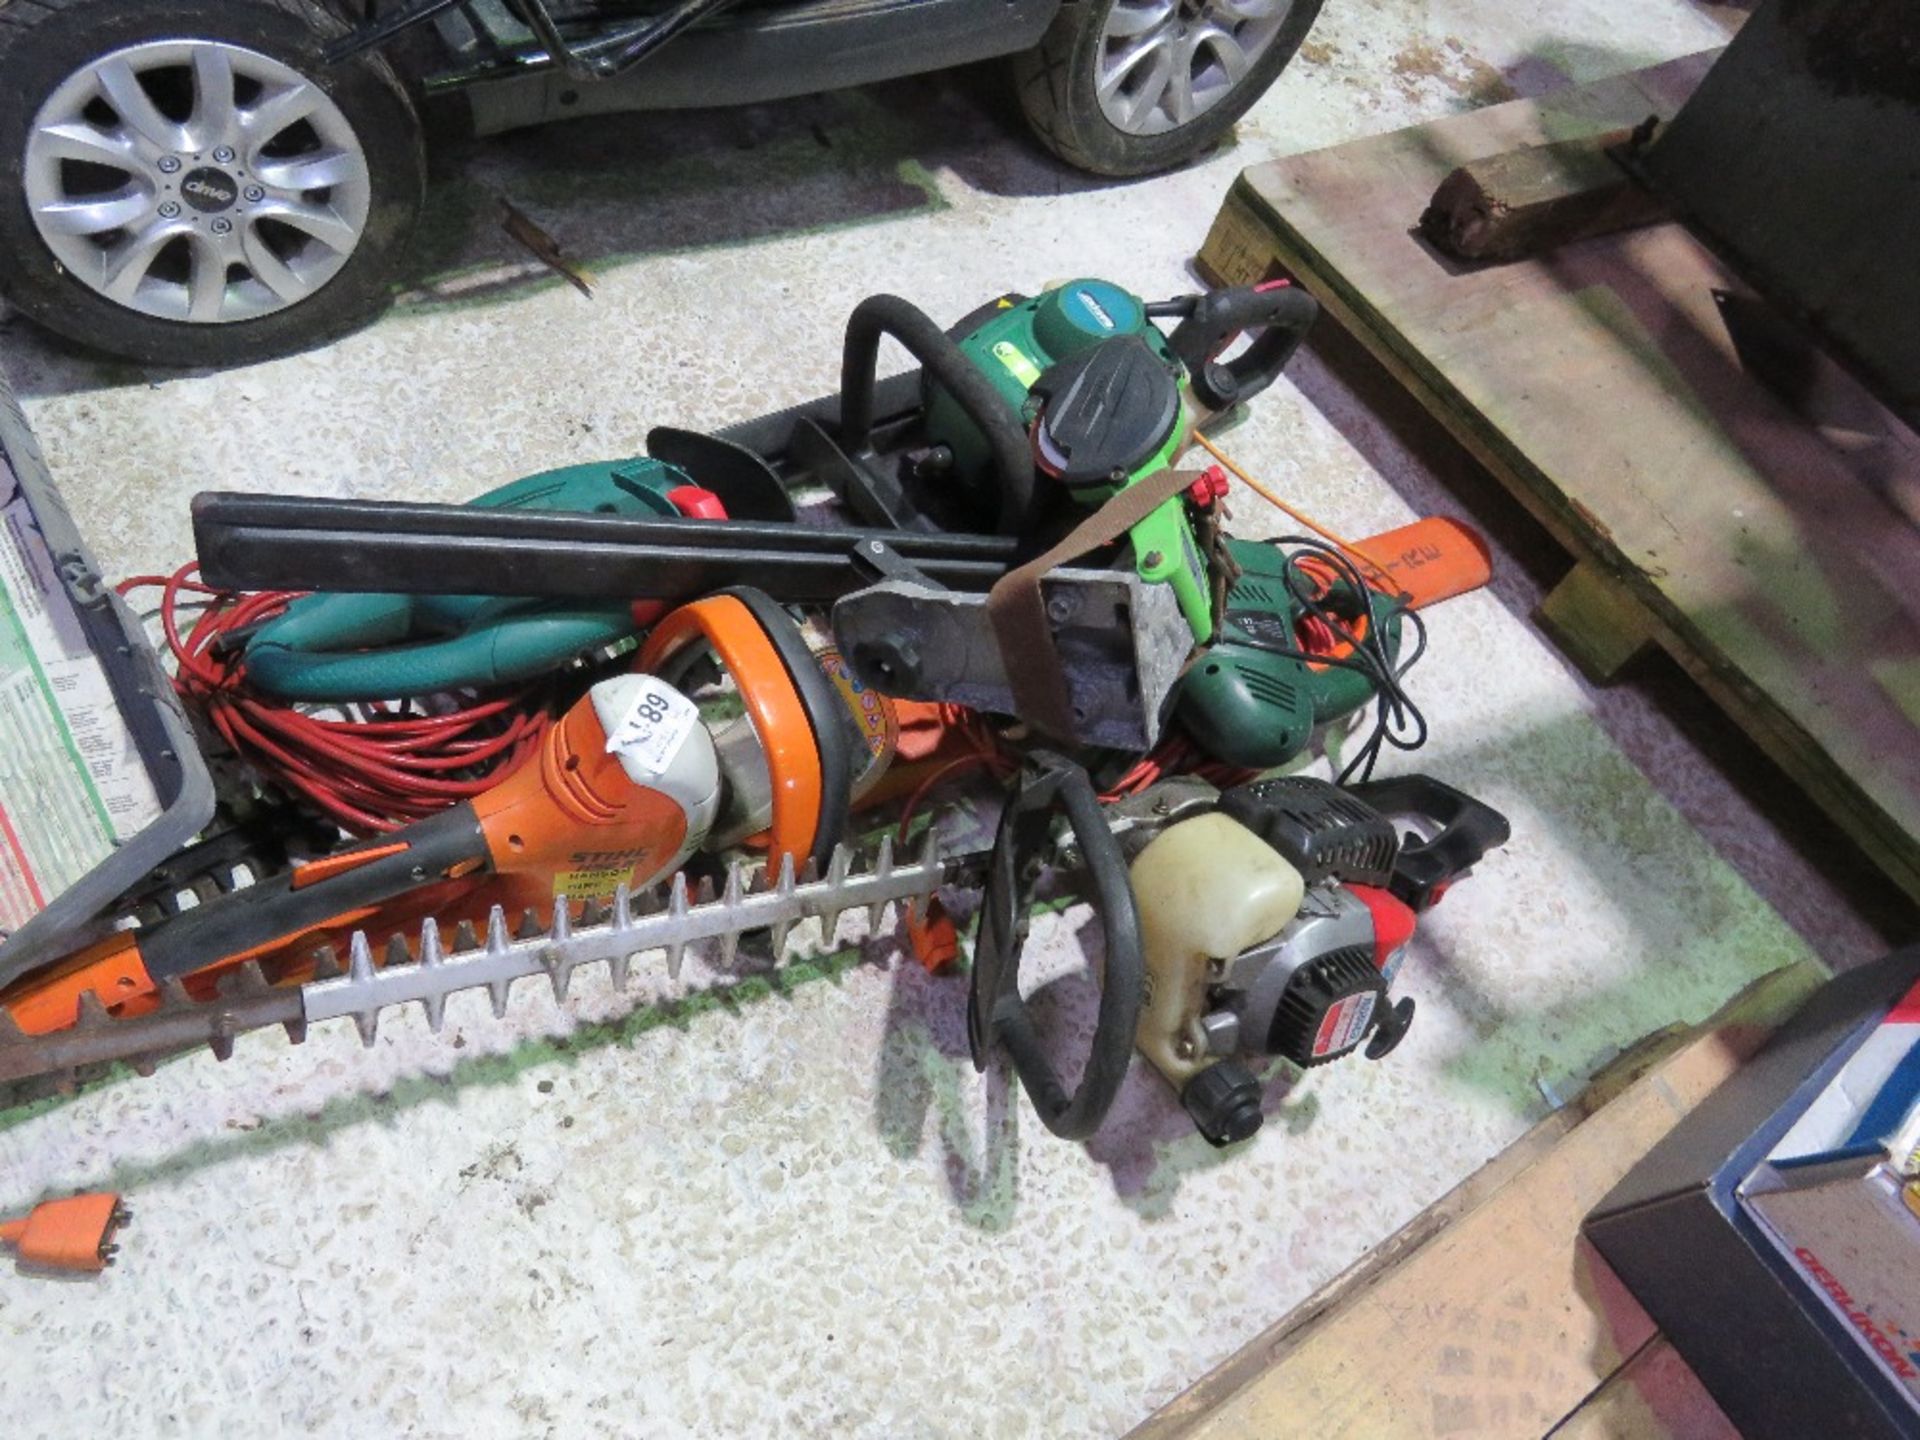 2 X PETROL HEDGE CUTTERS PLUS 2 X ELECTRIC HEDGE CUTTERS AND A CHAINSAW SHARPENER.